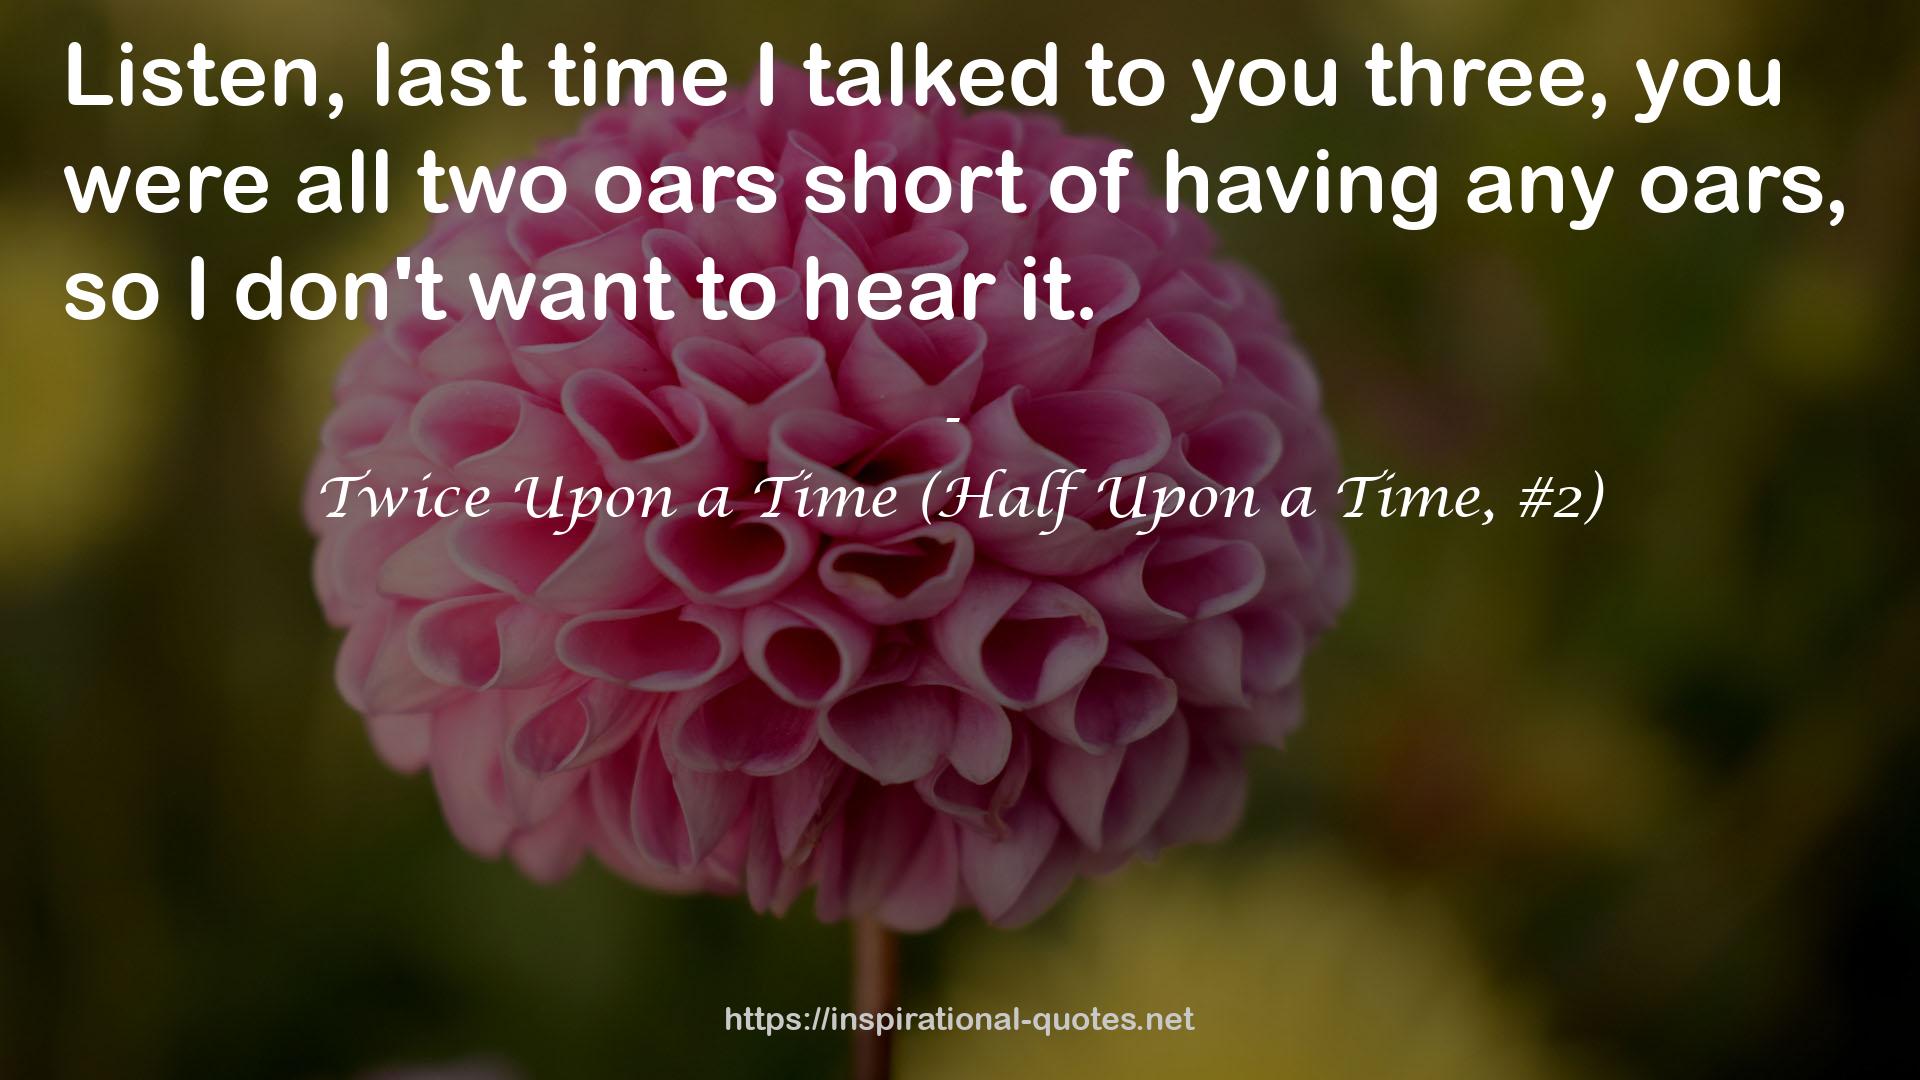 Twice Upon a Time (Half Upon a Time, #2) QUOTES